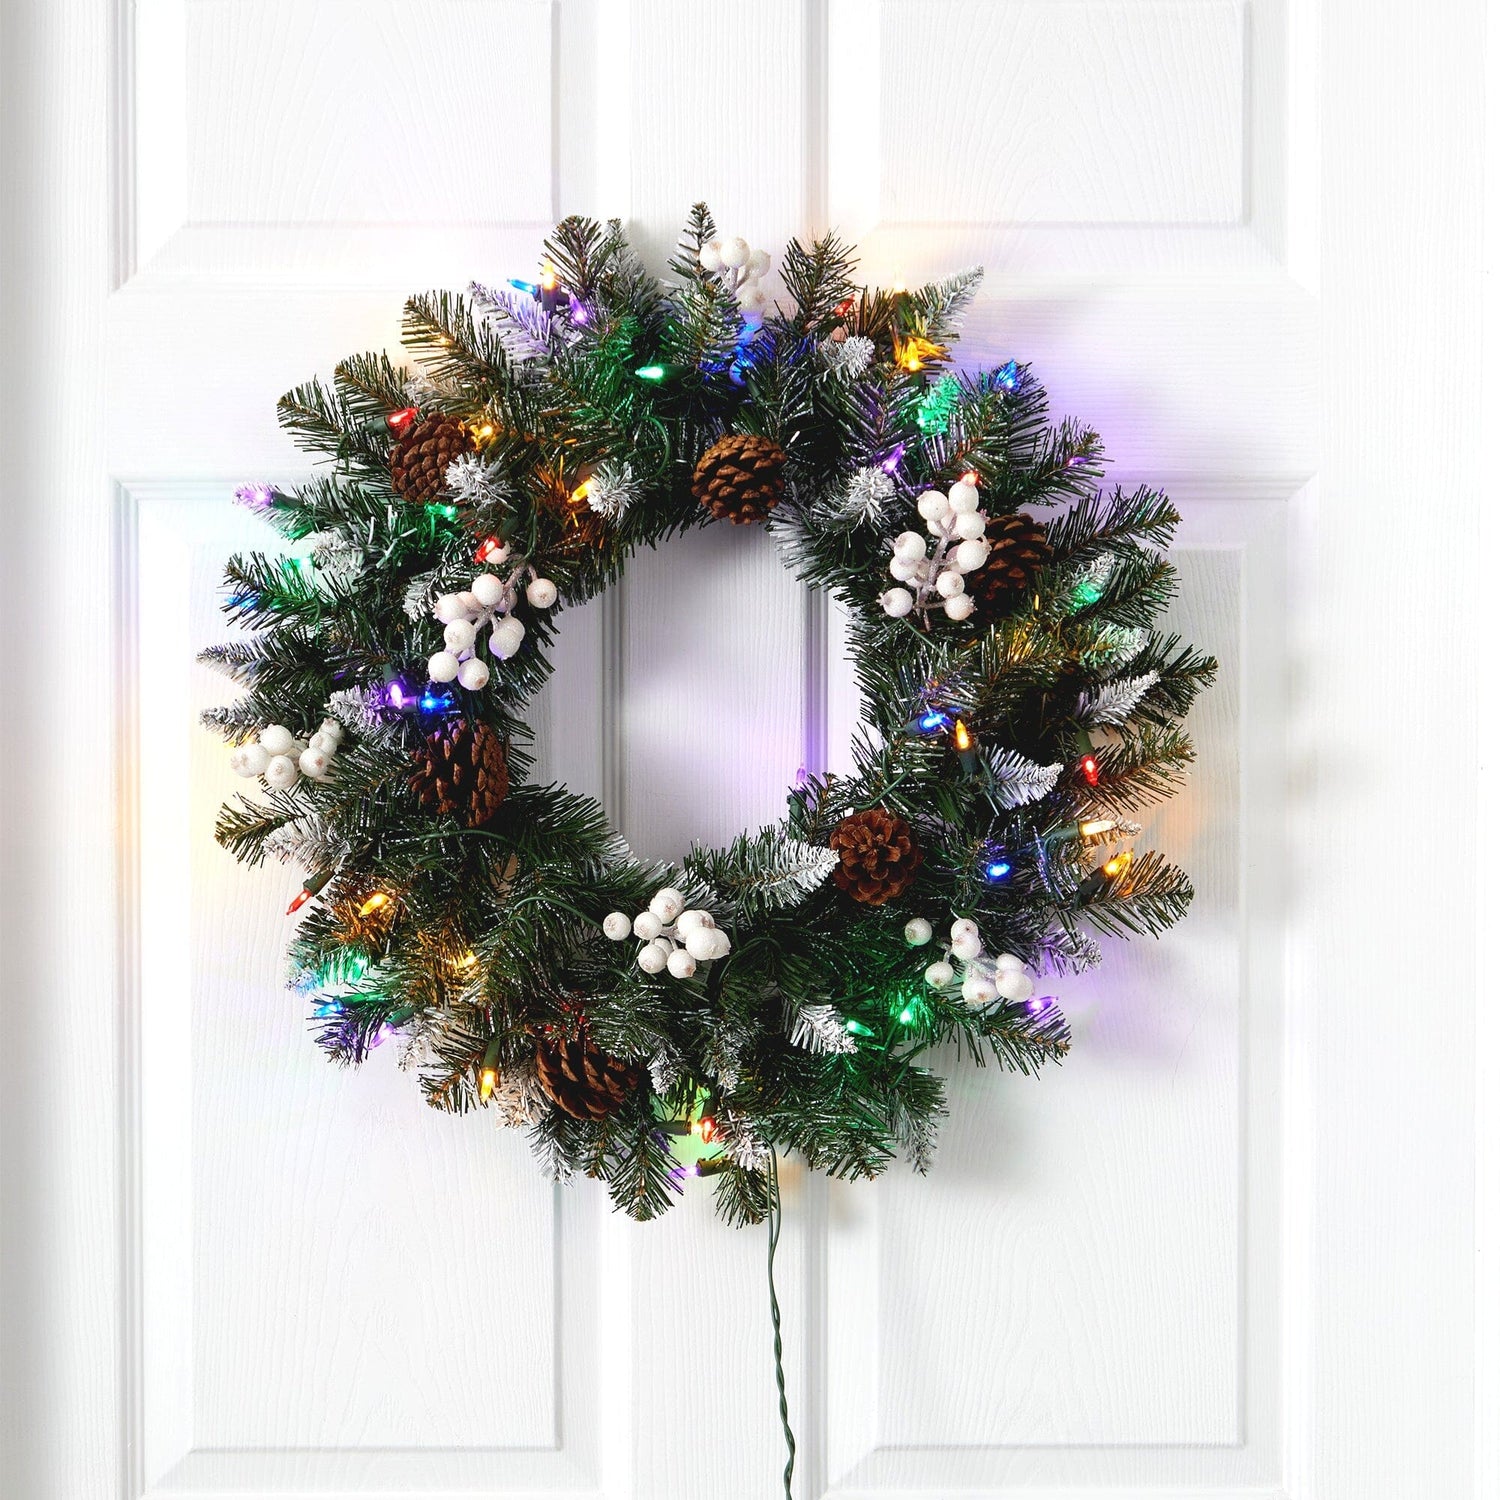 24” Snow Tipped Artificial Christmas Wreath with 50 Multicolored LED Lights, White Berries and Pine Cones